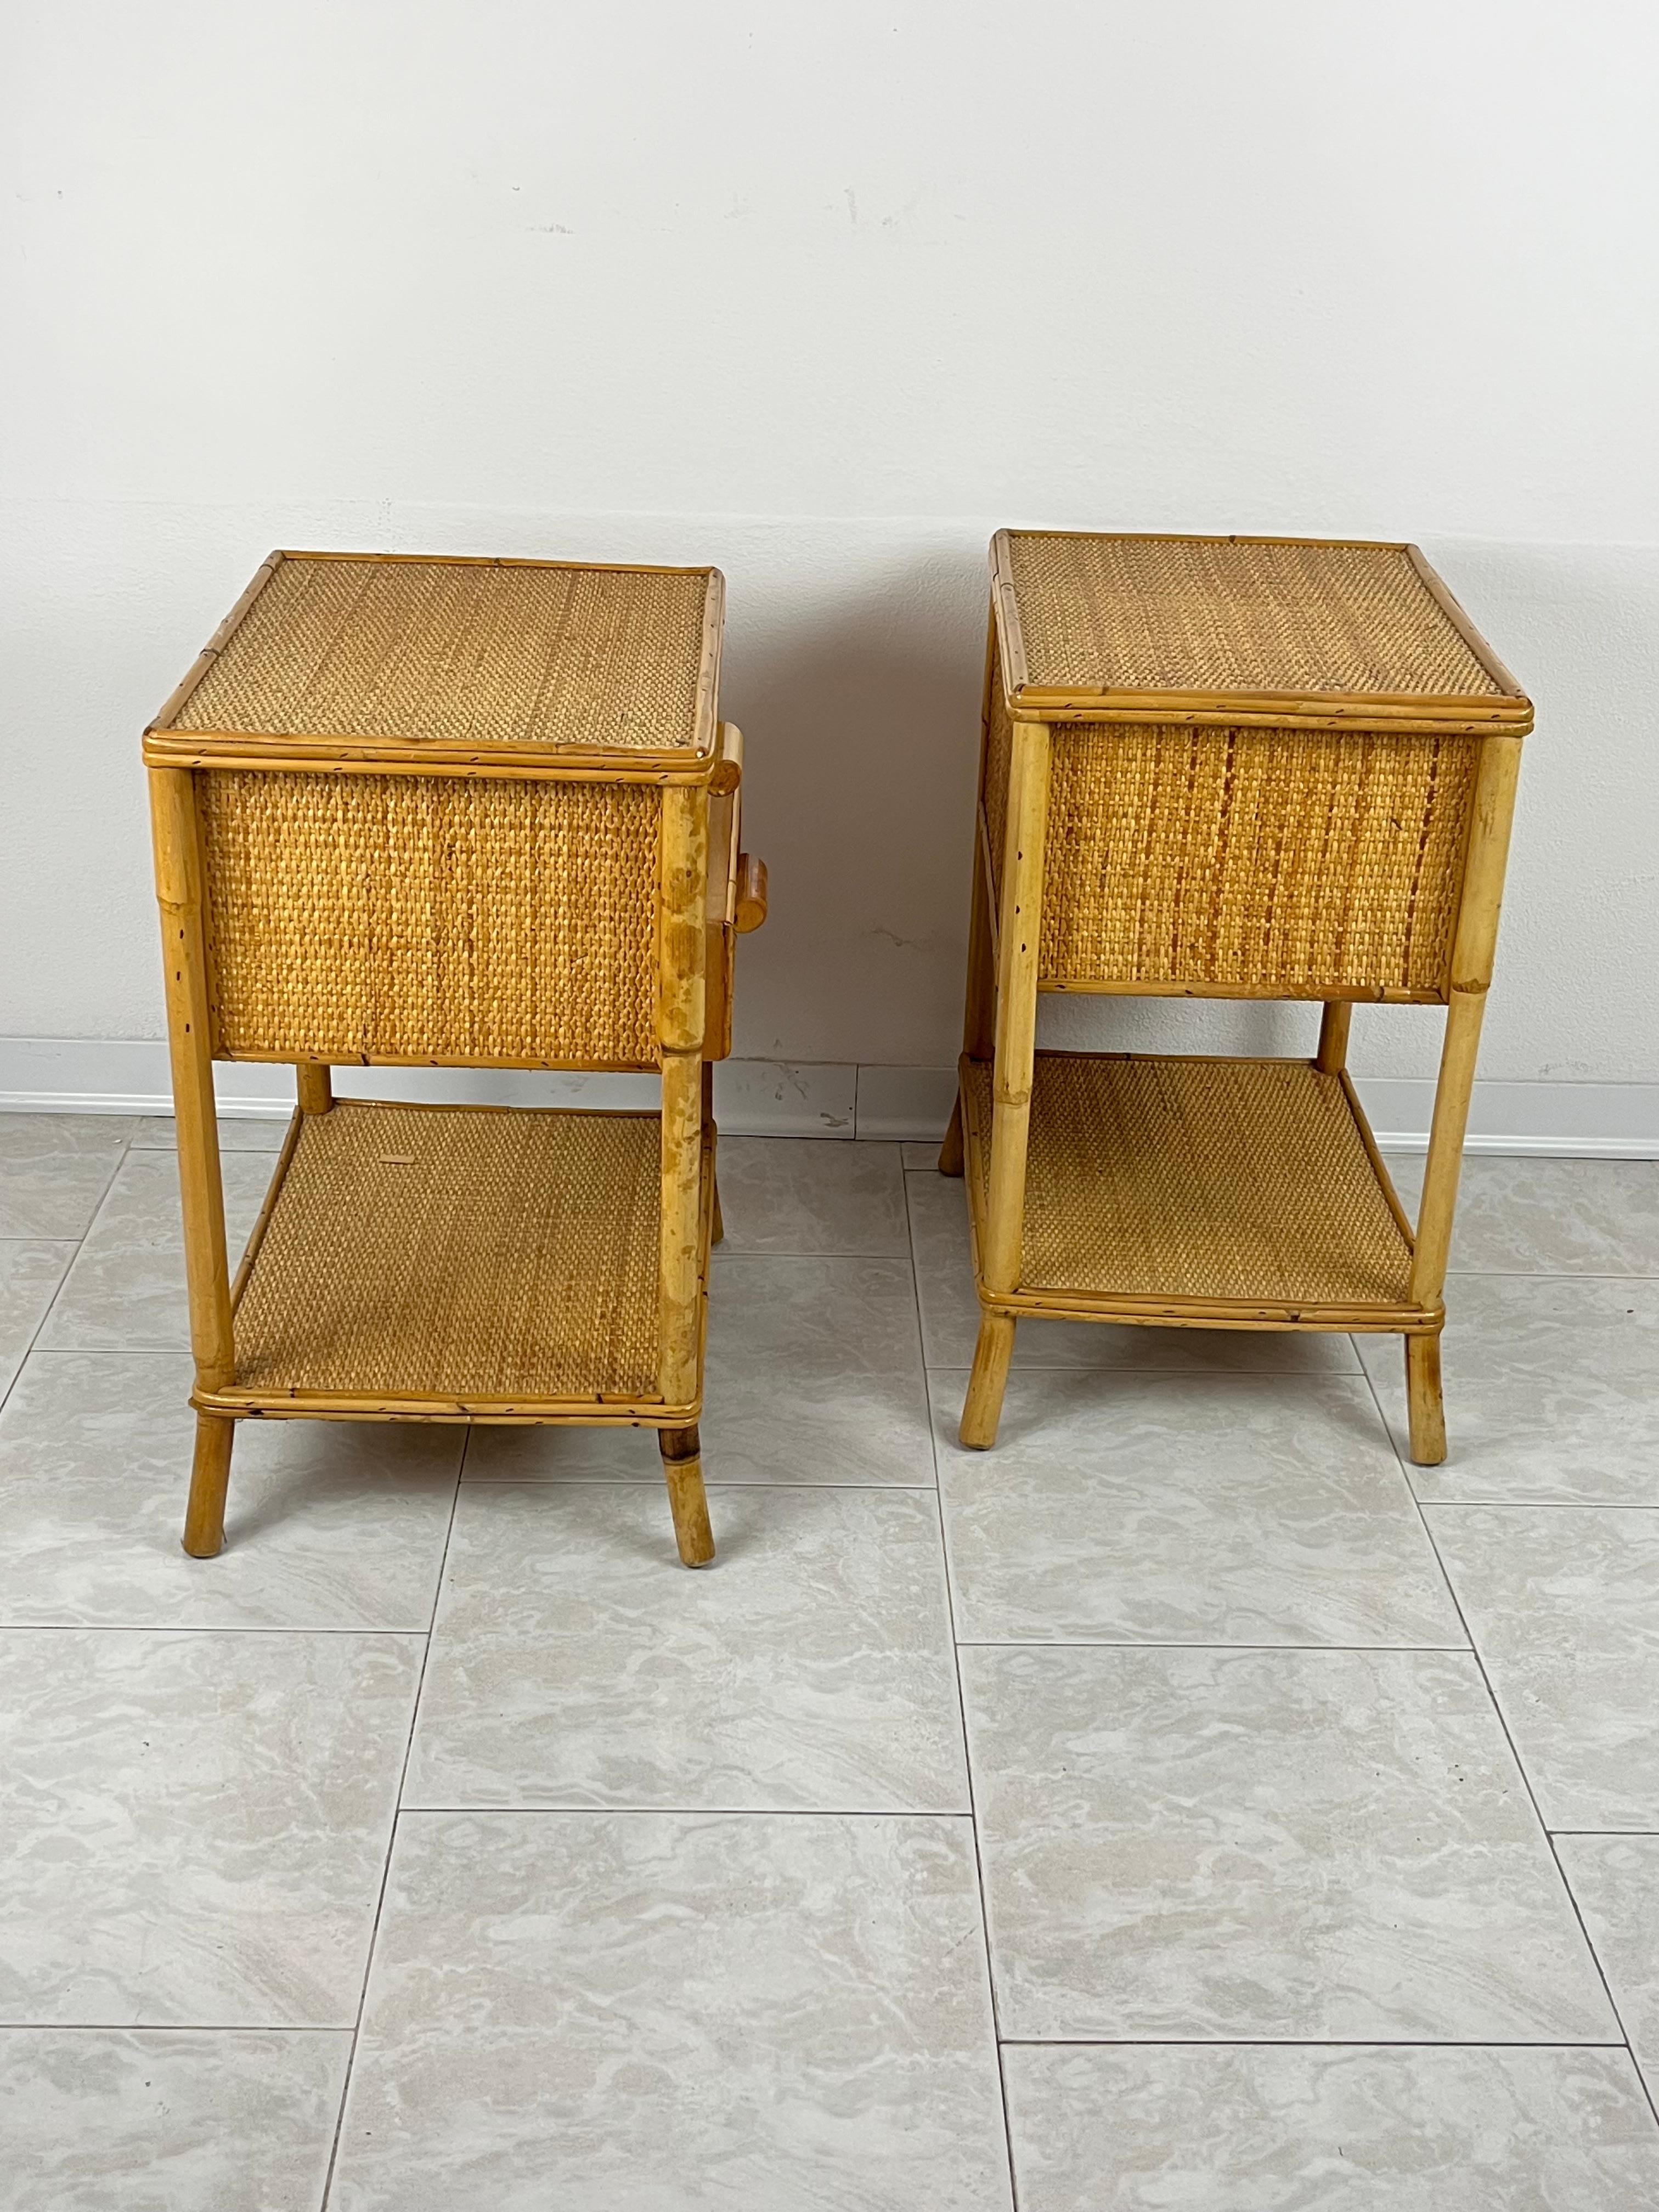 Pair of Vintage Italian Bamboo and Rattan Bedside Tables 1970s In Good Condition For Sale In Palermo, IT